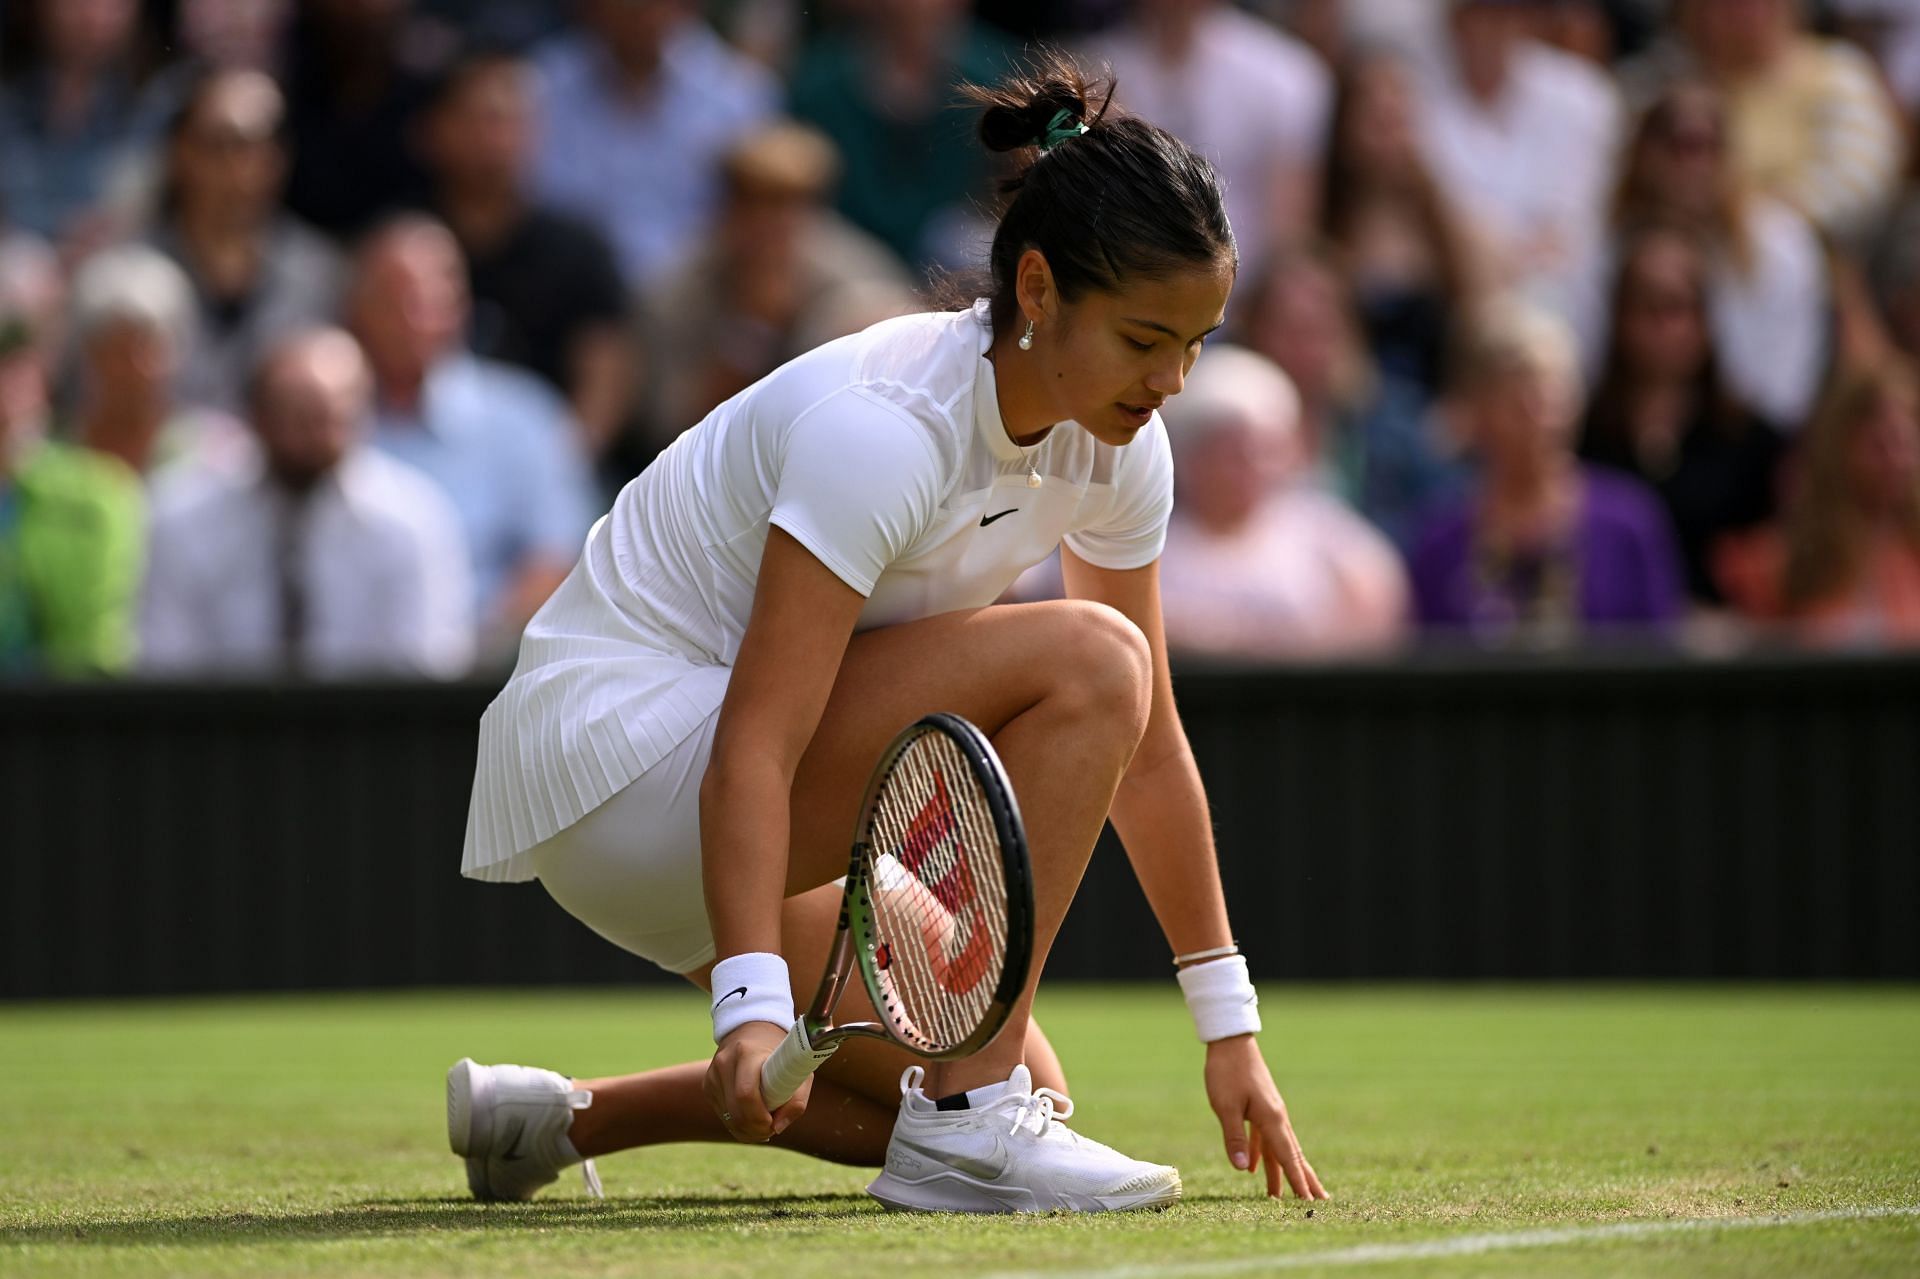 Raducanu lost to Caroline Garcia in the second round of Wimbledon this year